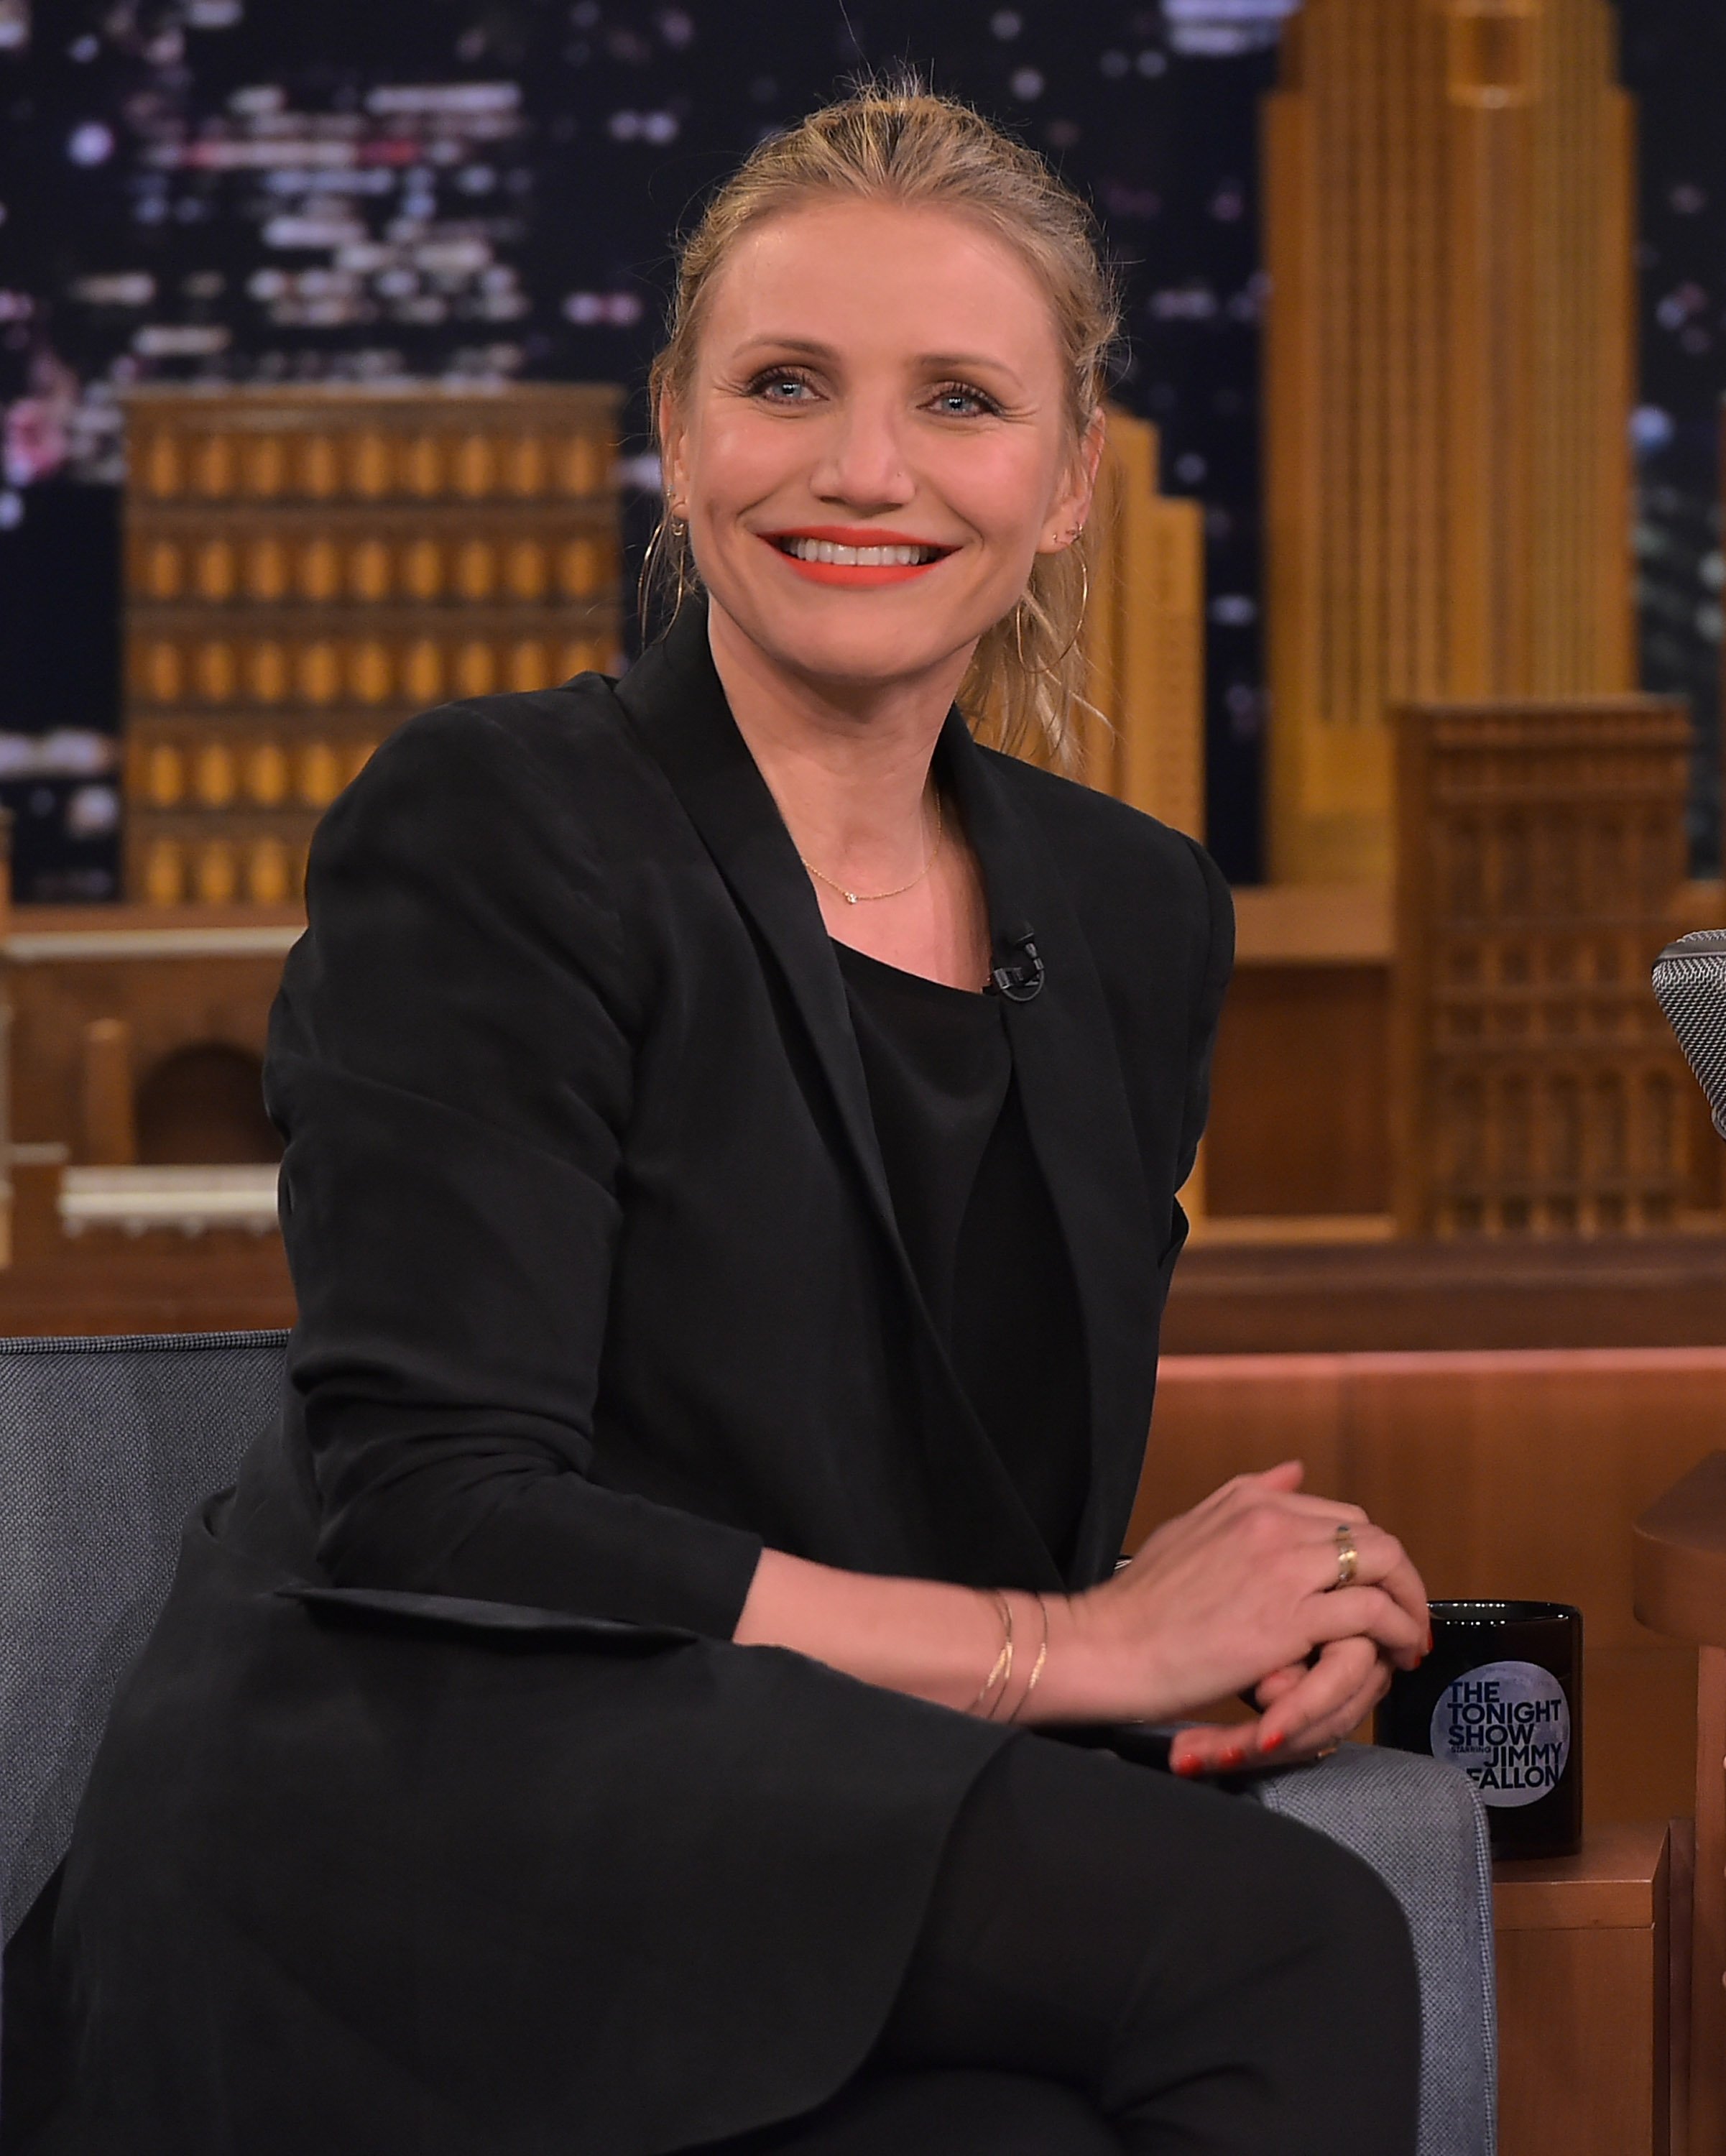 Cameron Diaz bei "The Tonight Show Starring Jimmy Fallon" am 6. April 2016 | Quelle: Getty Images